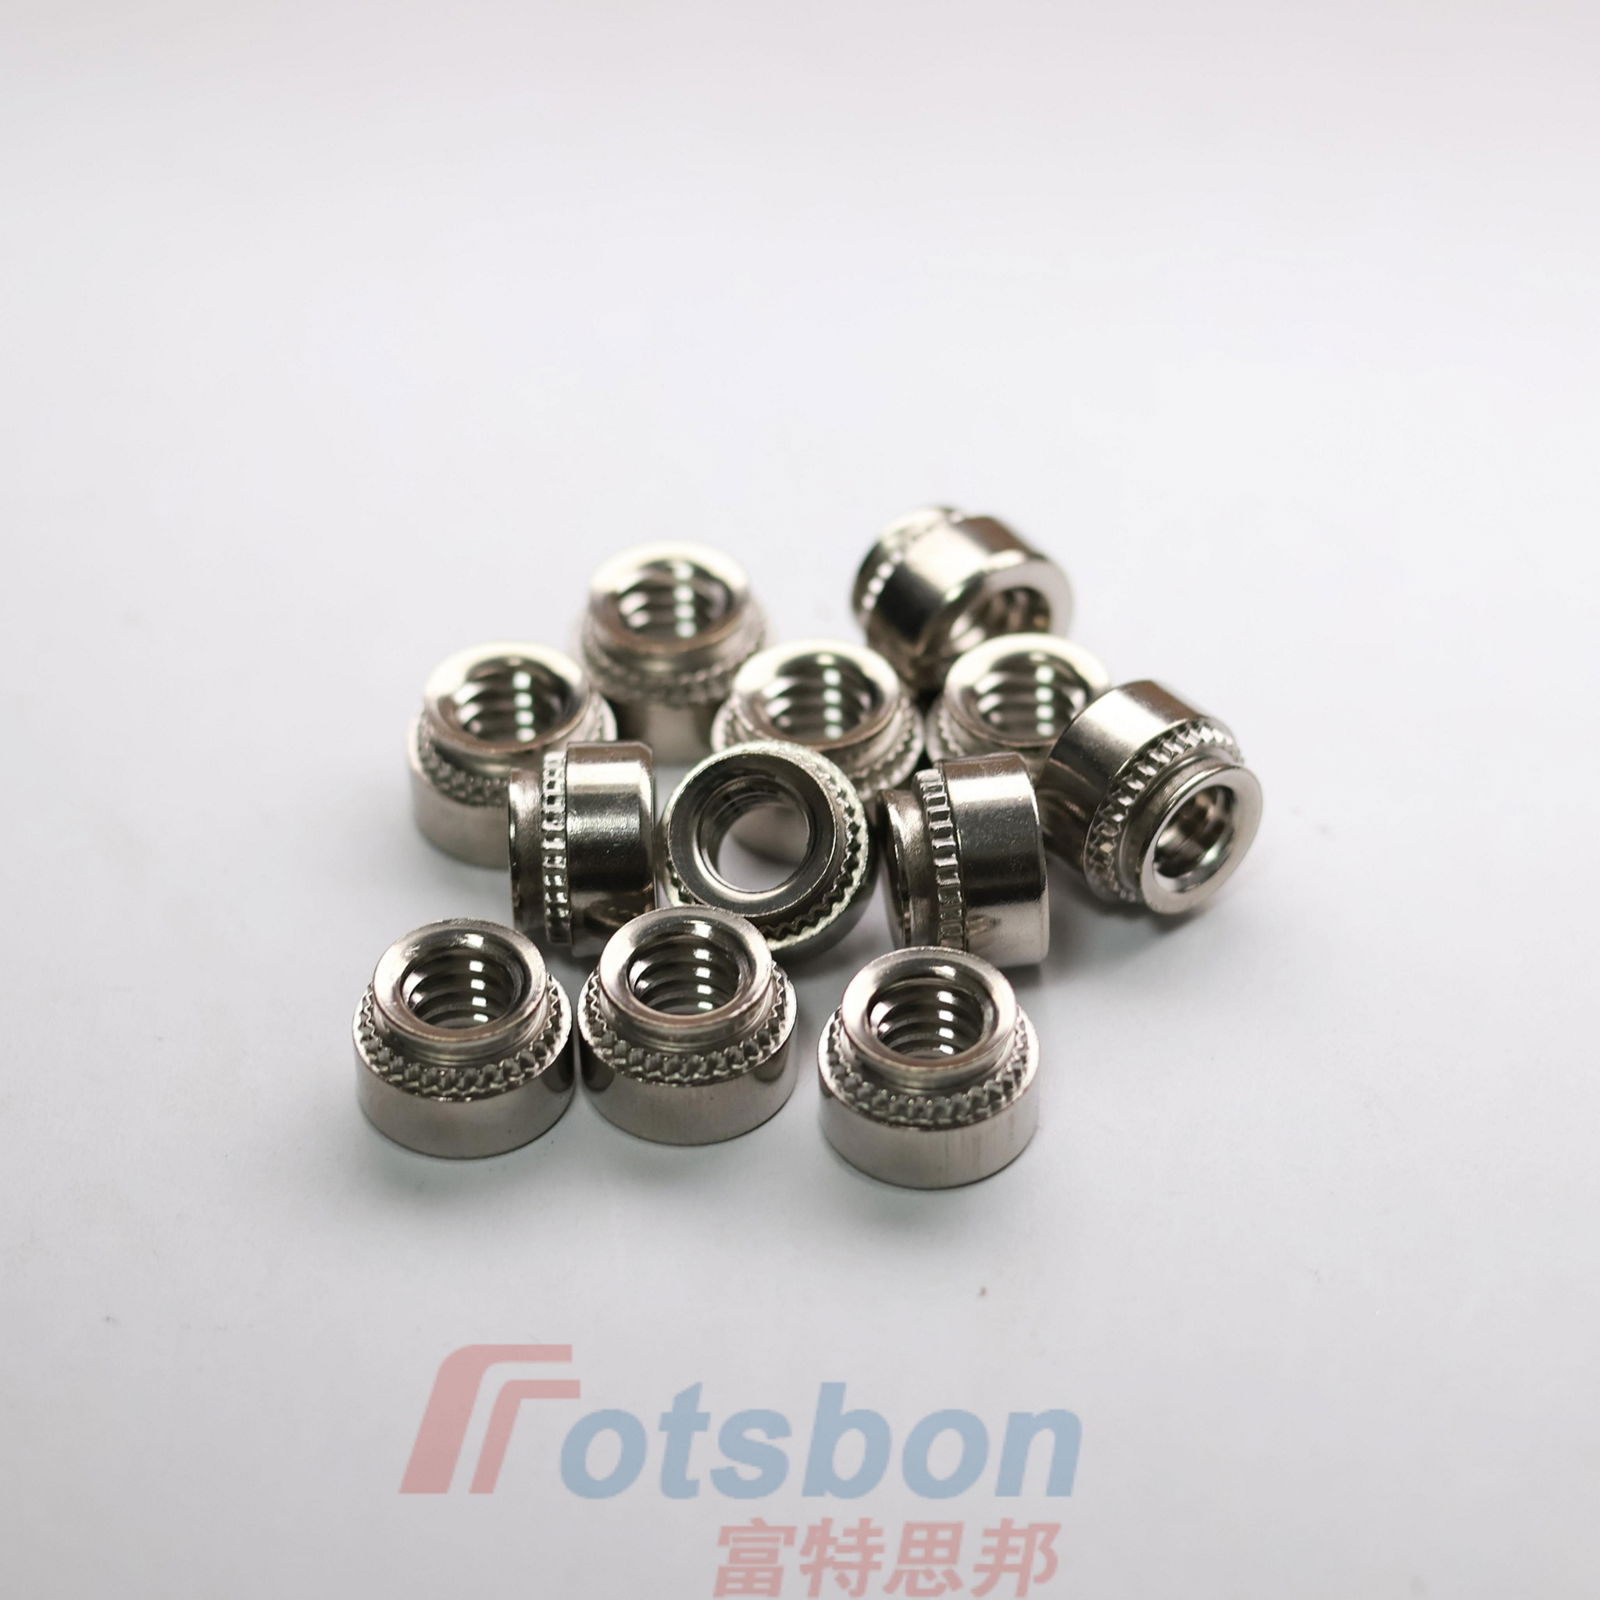 Self-Clinching Nuts CLS-632-1Stainless Inch Threaded 2